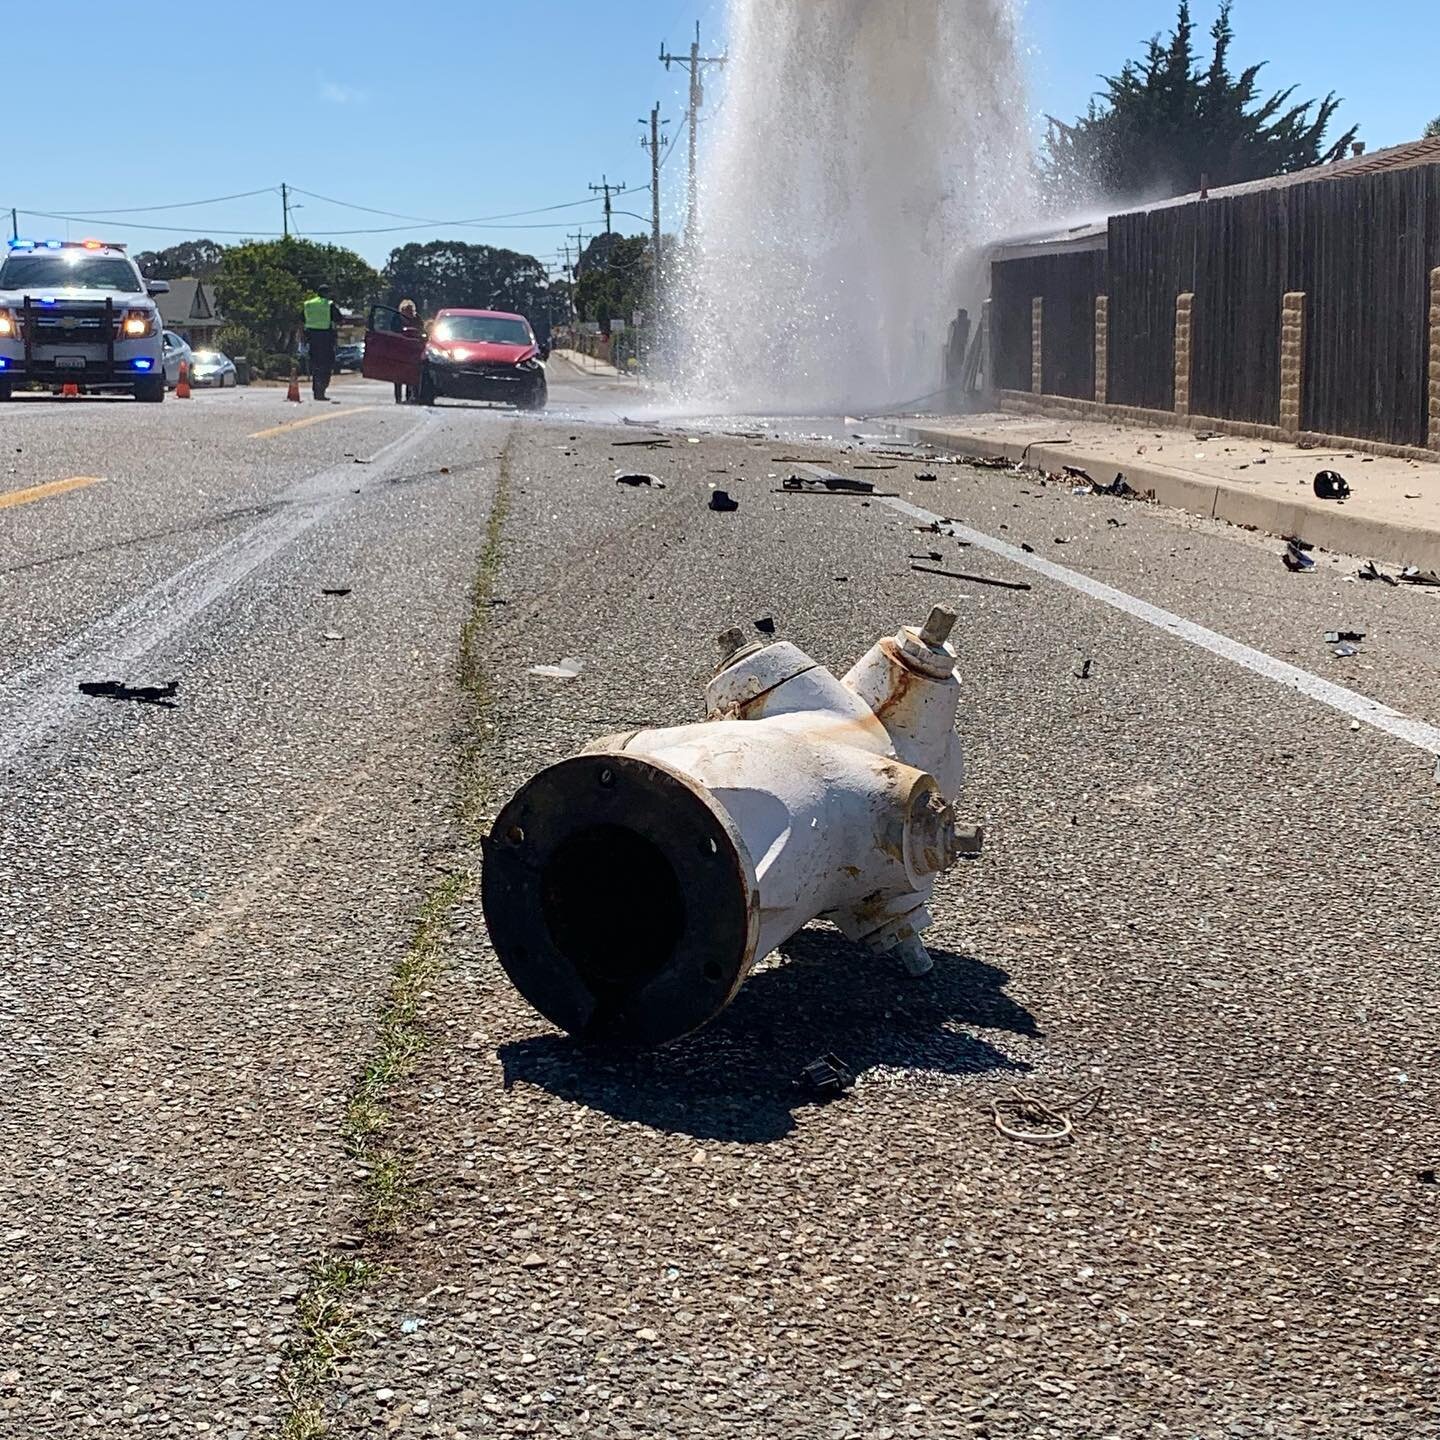 FCFA at scene of a two vehicle collision involving a hydrant - The Pike Grover Beach. Thankfully no injuries! #cityofgroverbeachca #5citiesfire